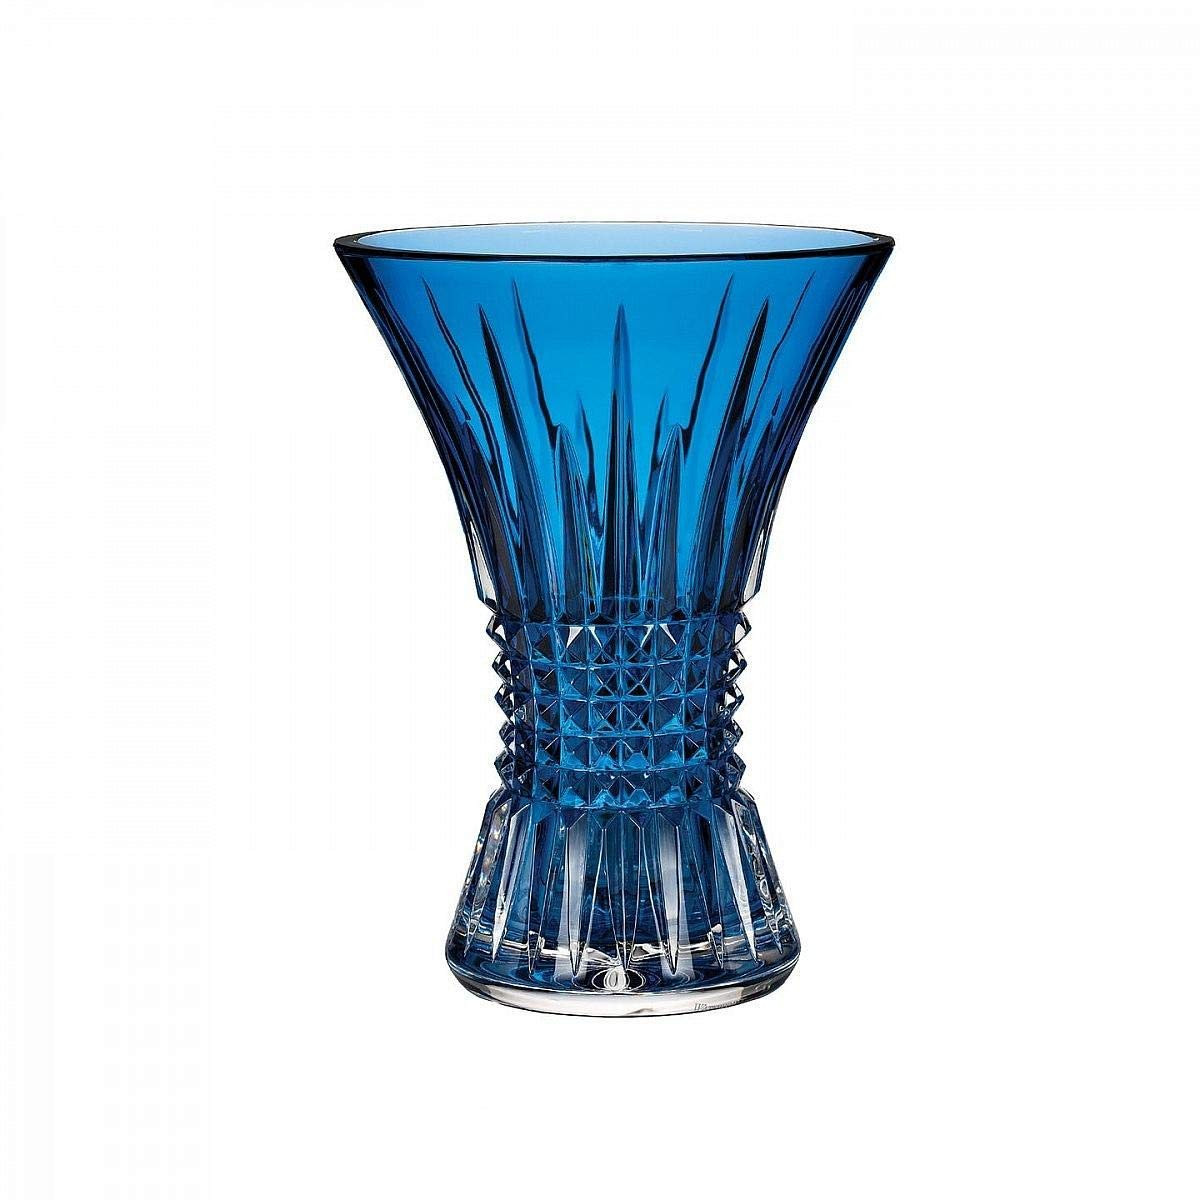 10 Fabulous Waterford Lismore Vase 8 2024 free download waterford lismore vase 8 of amazon com waterford lismore diamond 8 sapphire vase home kitchen with 611t 2m3bwl sl1200